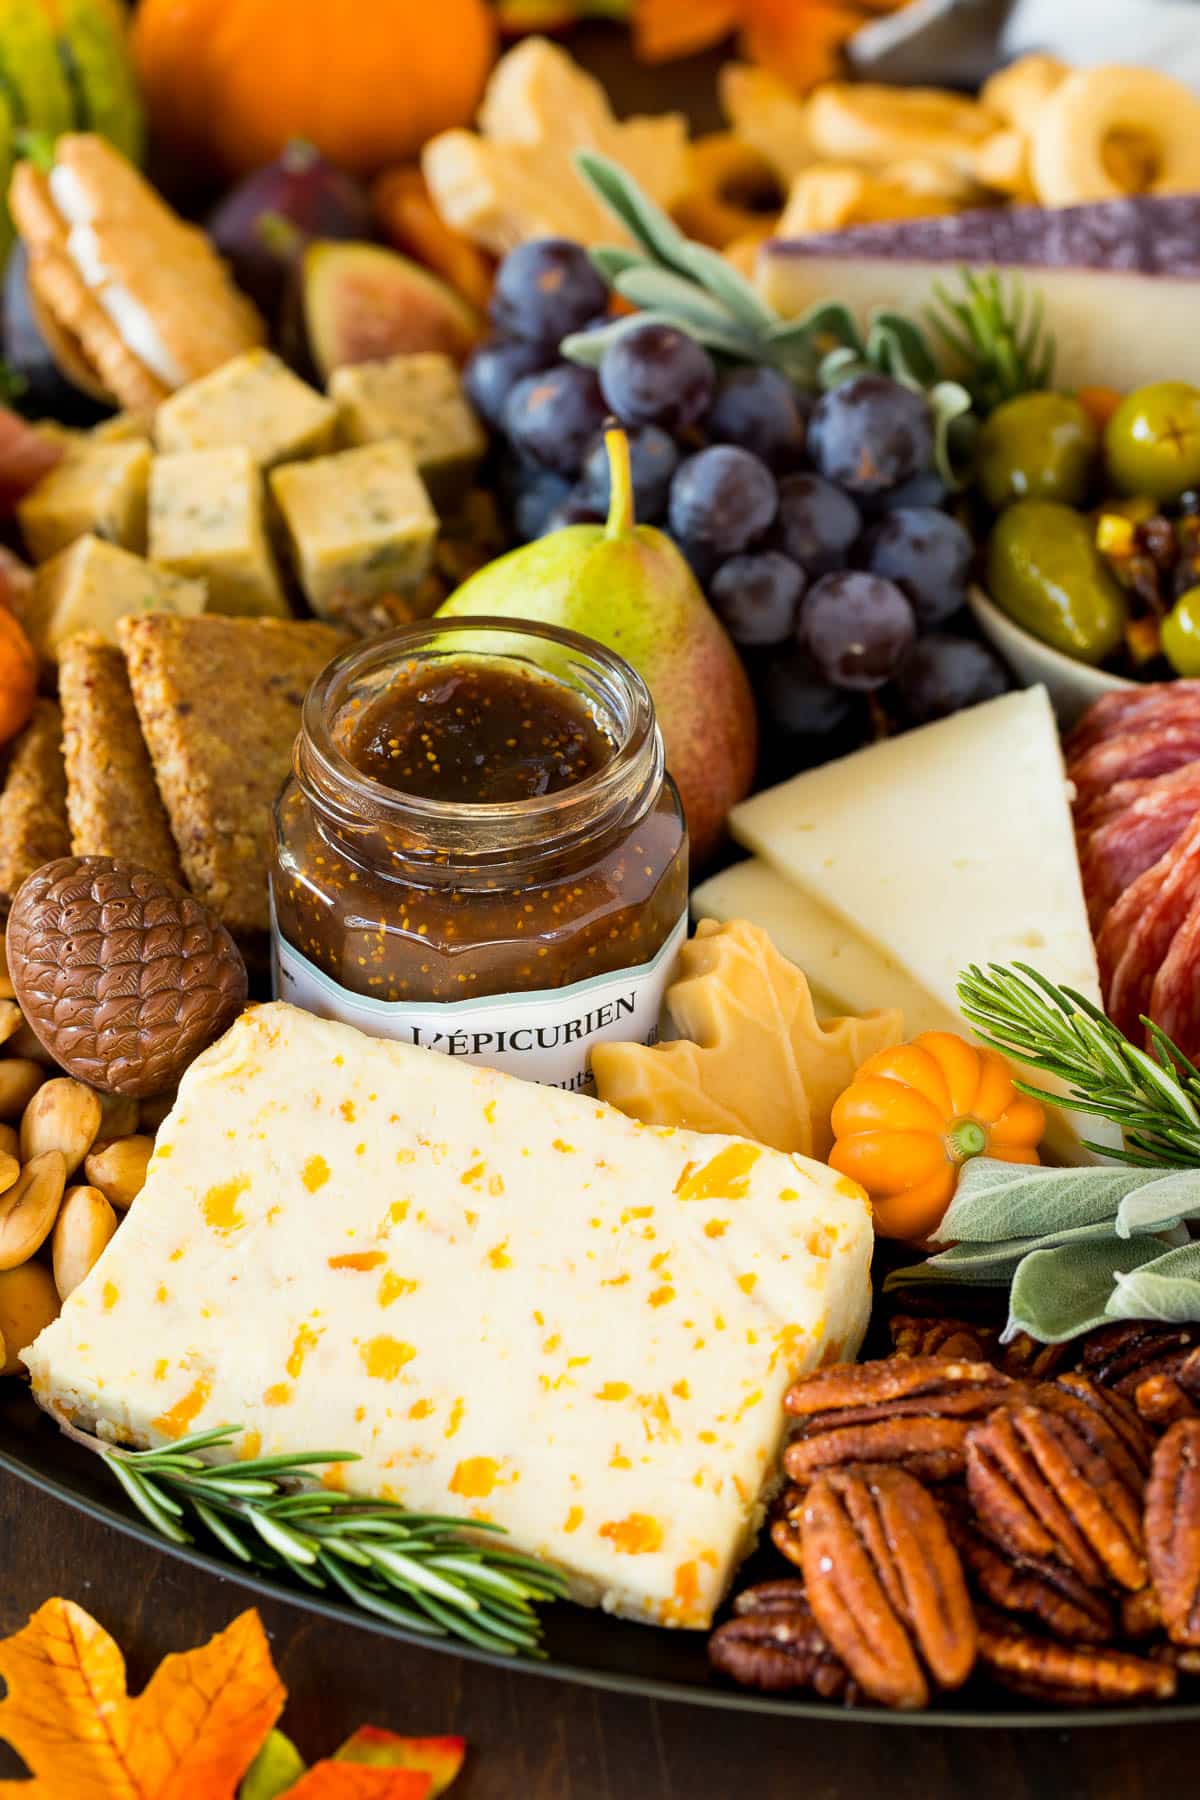 A close up of a meat and cheese board with nuts and a jar of jam.